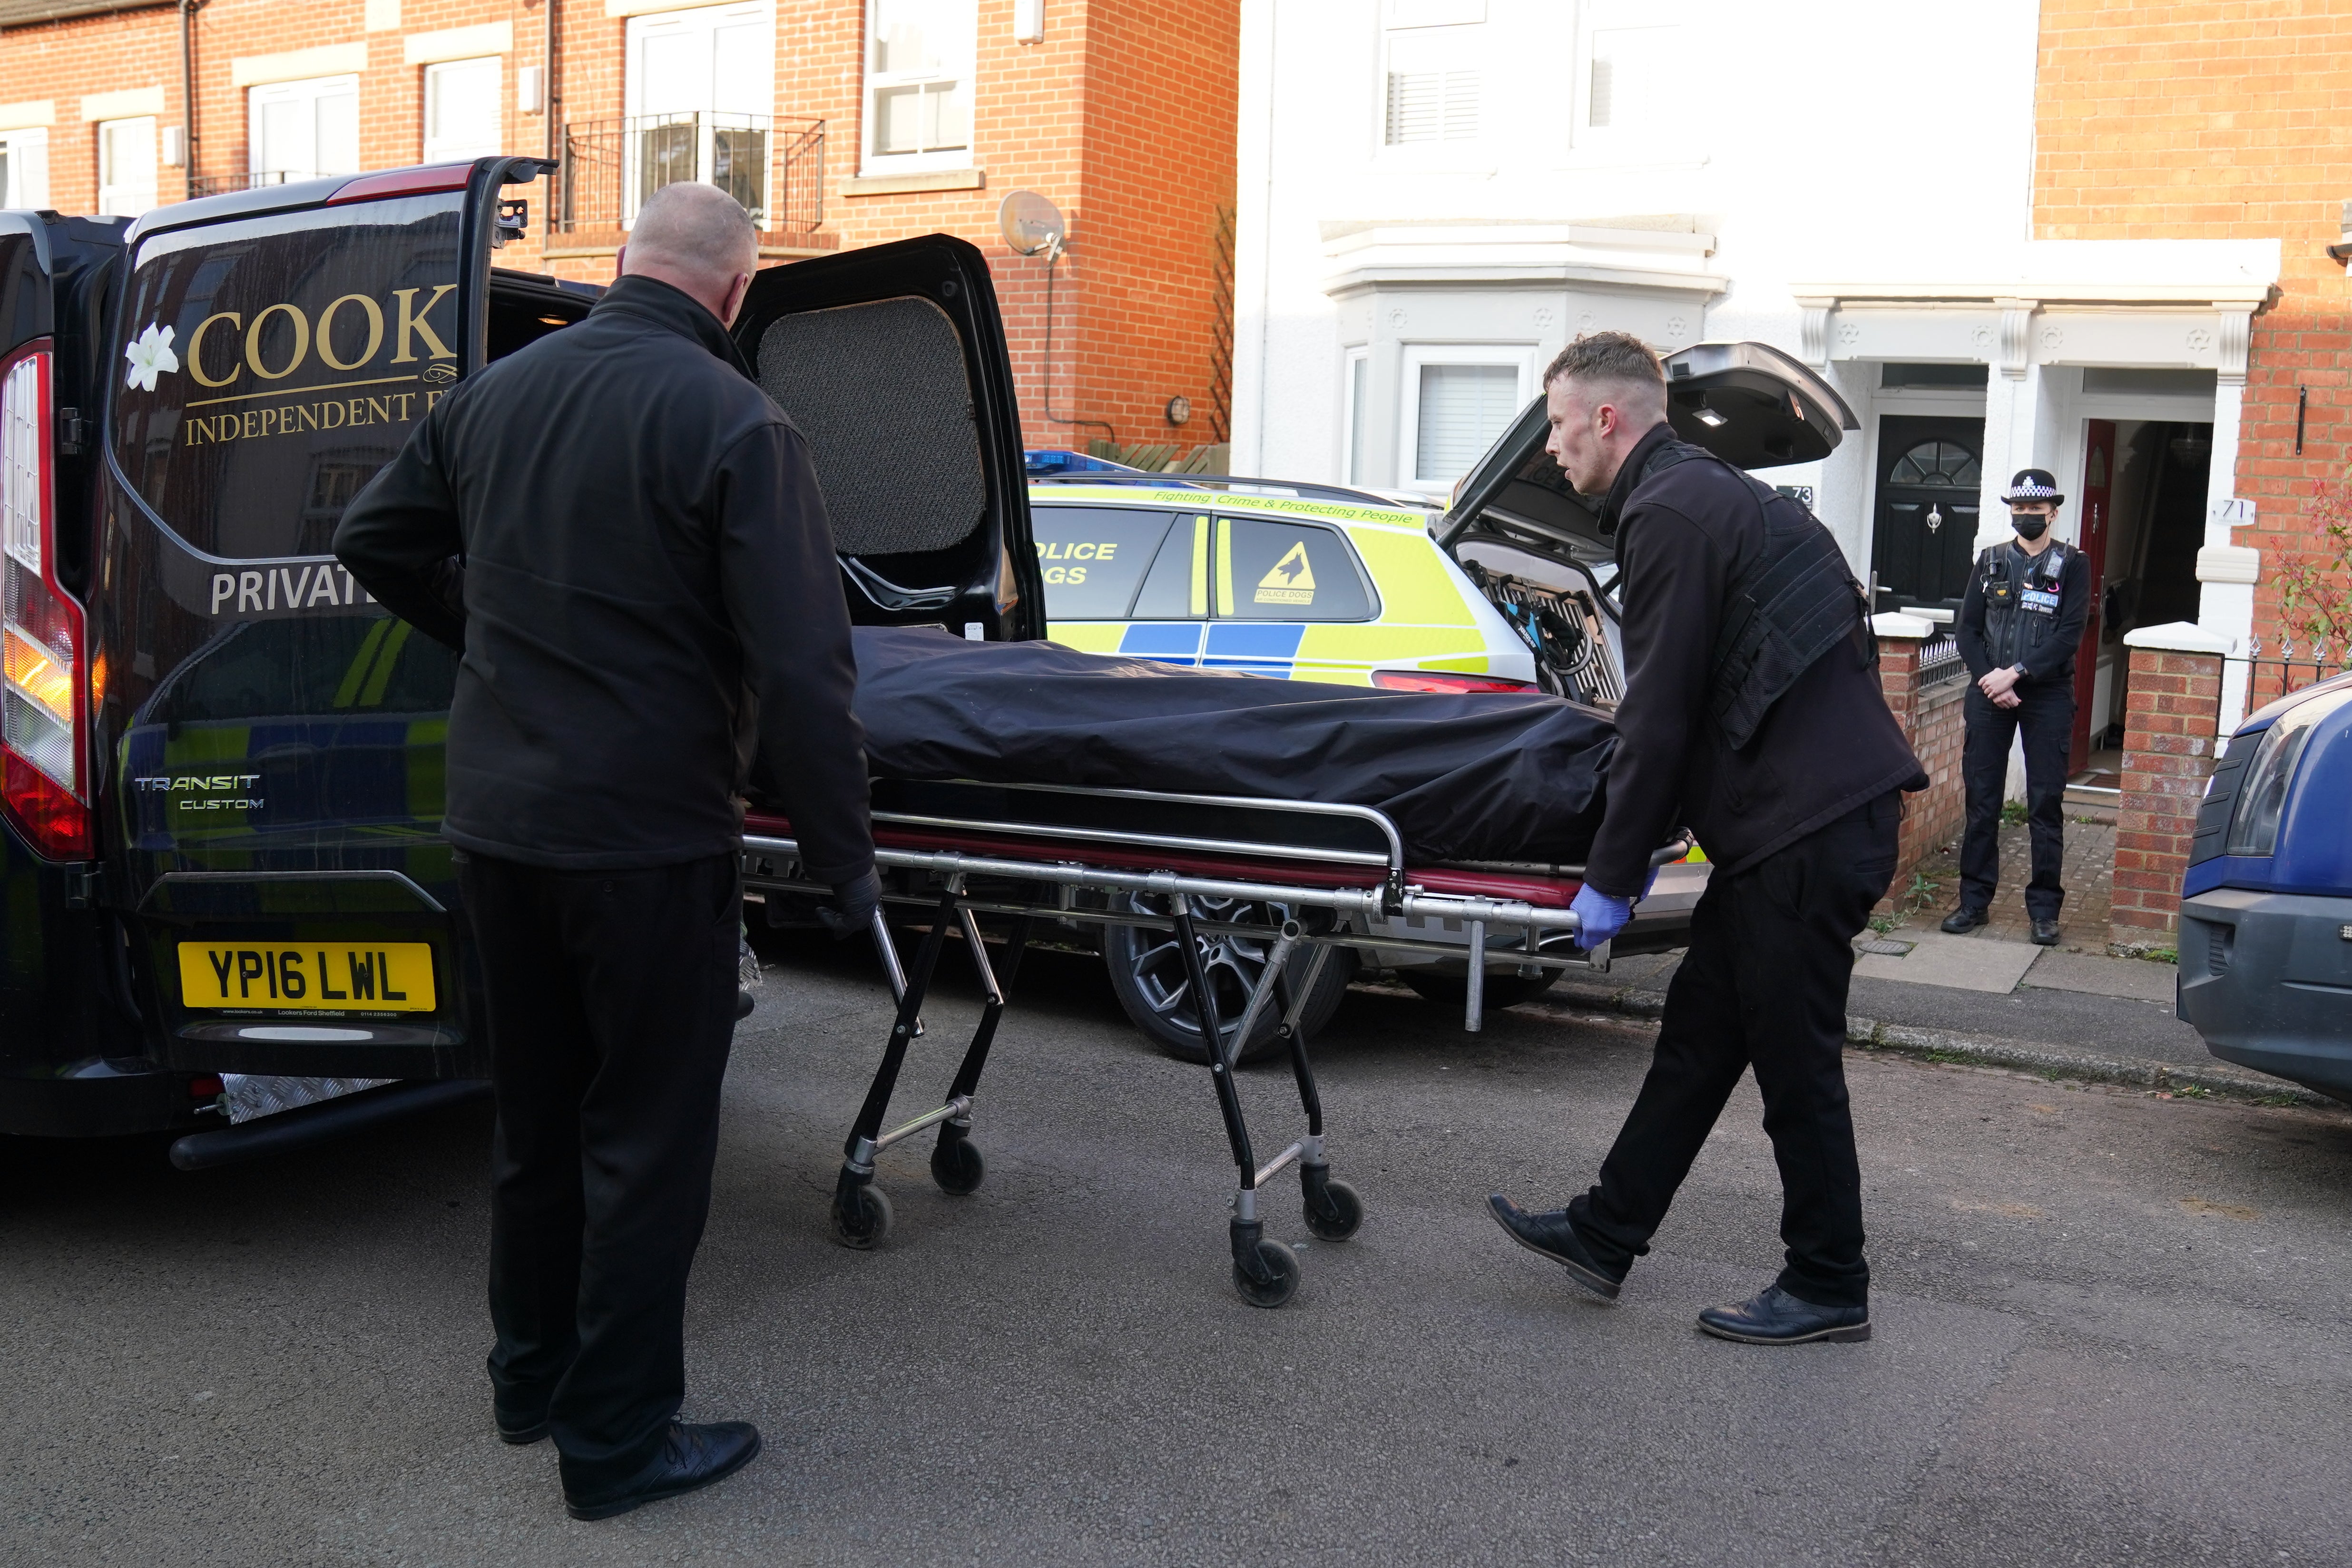 The body is removed from the property in Moore Street, Kingsley, Northampton following its discovery in the rear garden. The remains are expected be taken to Leicester where they will be forensically examined by a Home Office pathologist but are believed to be that of a missing 42-year-old male. The investigation was mounted following the arrest of Fiona Beal, 48, at a hotel in Cumbria early on Wednesday morning. She has now been charged with murder. Picture date: Sunday March 20, 2022.